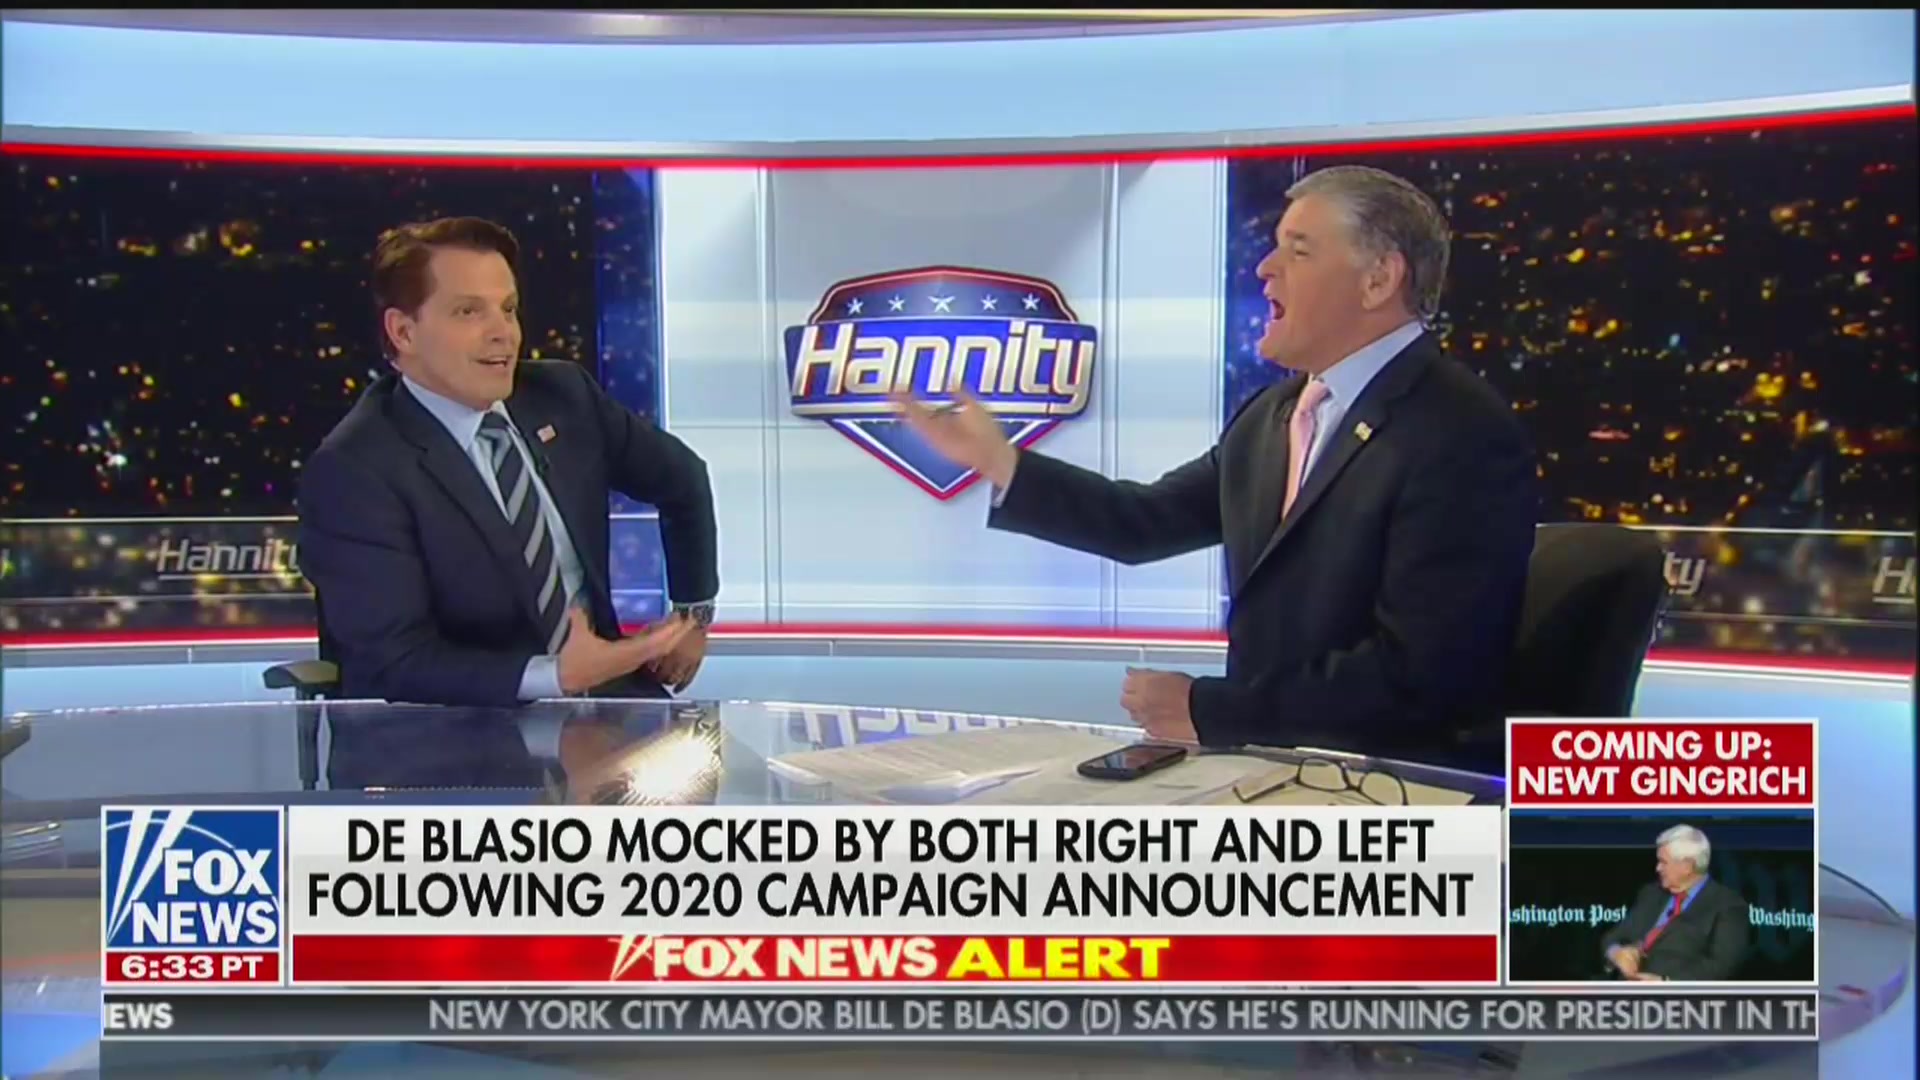 Hannity Urges Anthony Scaramucci to Run for New York City Mayor